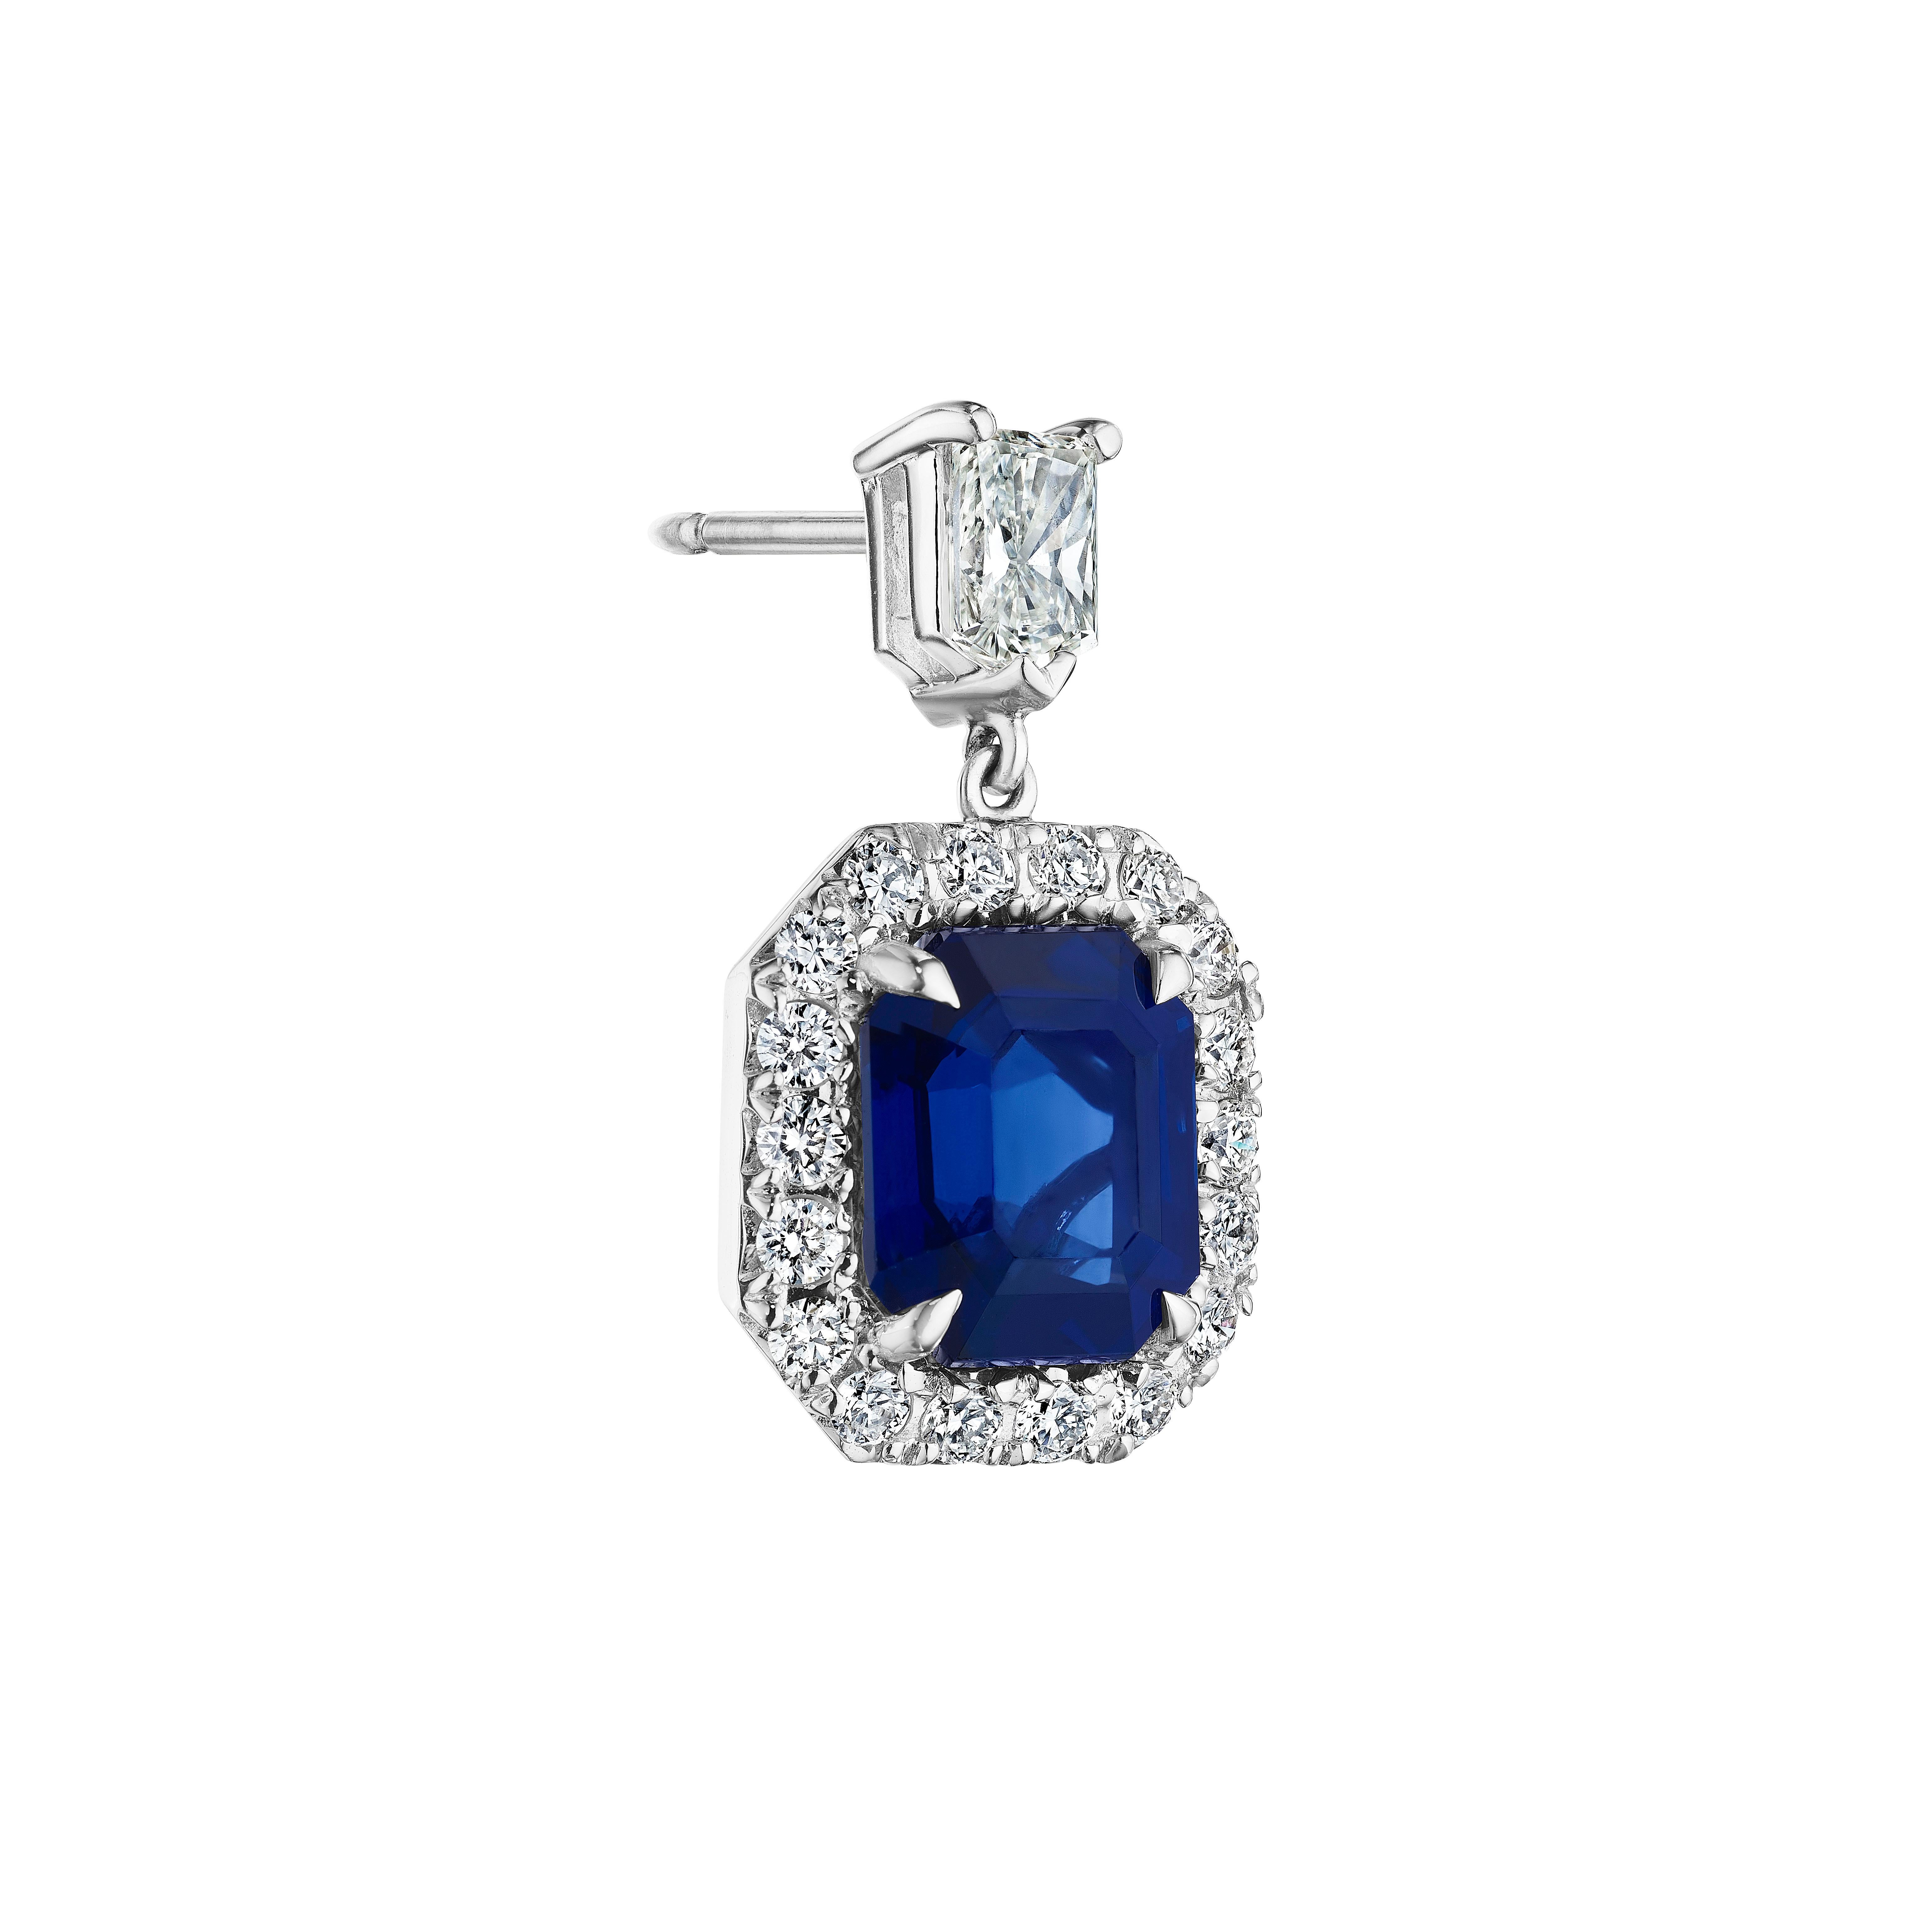 •	9.48 Carats
•	18KT White Gold

•	Number of Emerald Cut Sapphires: 2
•	Carat Weight: 7.84ctw

•	Number of Bullet Cut Diamonds: 2
•	Carat Weight: 0.84ctw

•	Number of Round Diamonds: 36
•	Carat Weight: 0.80ctw

•	A beautiful deep blue emerald cut